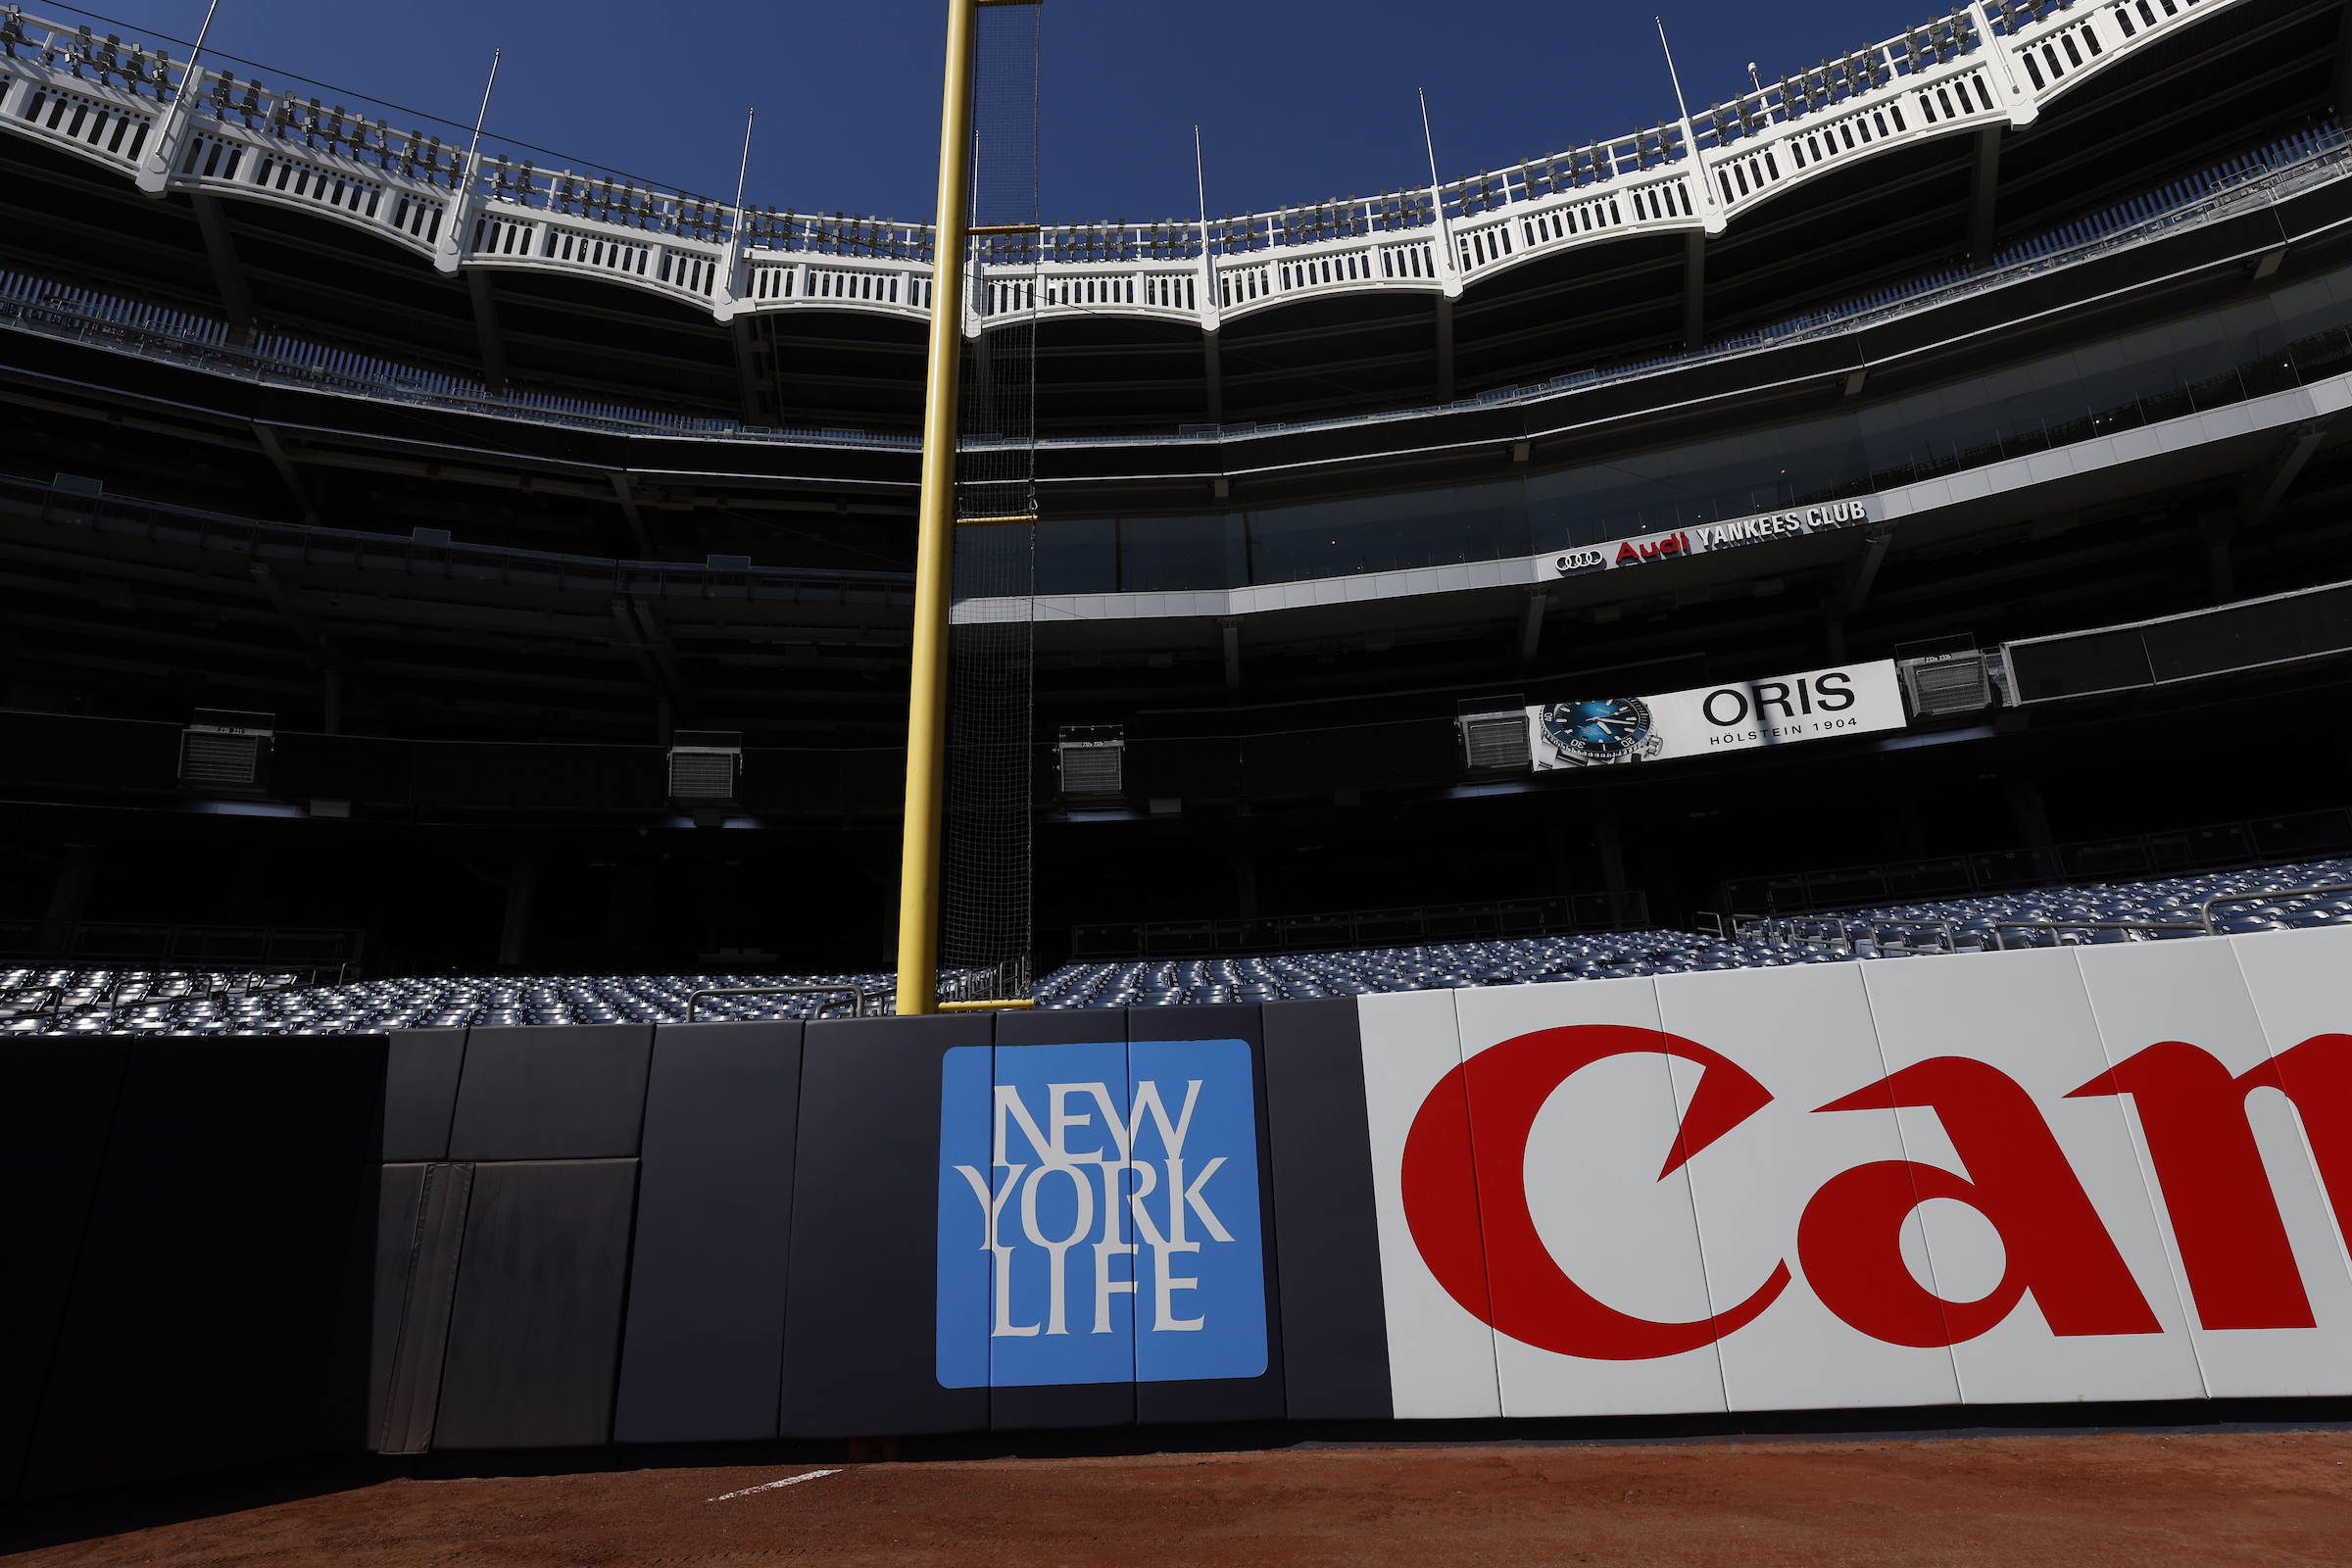 Download Exciting game night at the iconic Yankee Stadium